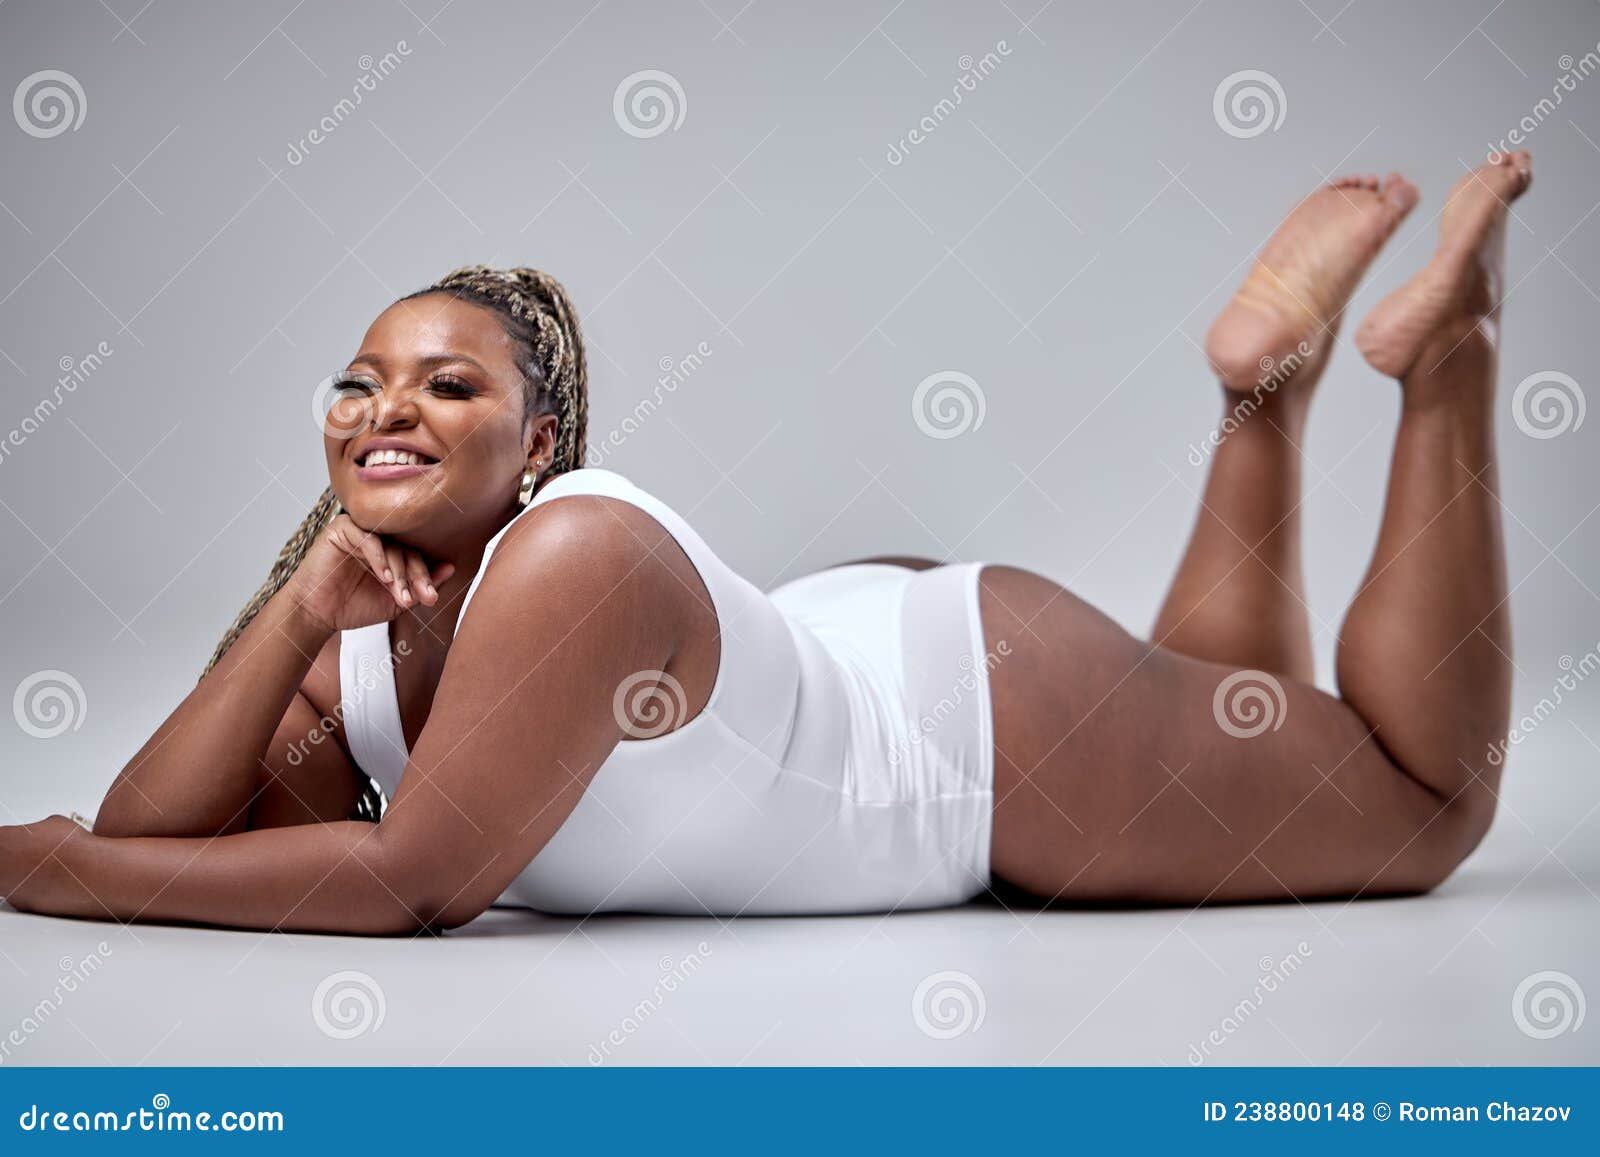 Cheerful Emotions Concept. Portrait of Happy Chubby Black Woman Smiling,  Laughing Stock Photo - Image of body, clothes: 238800148